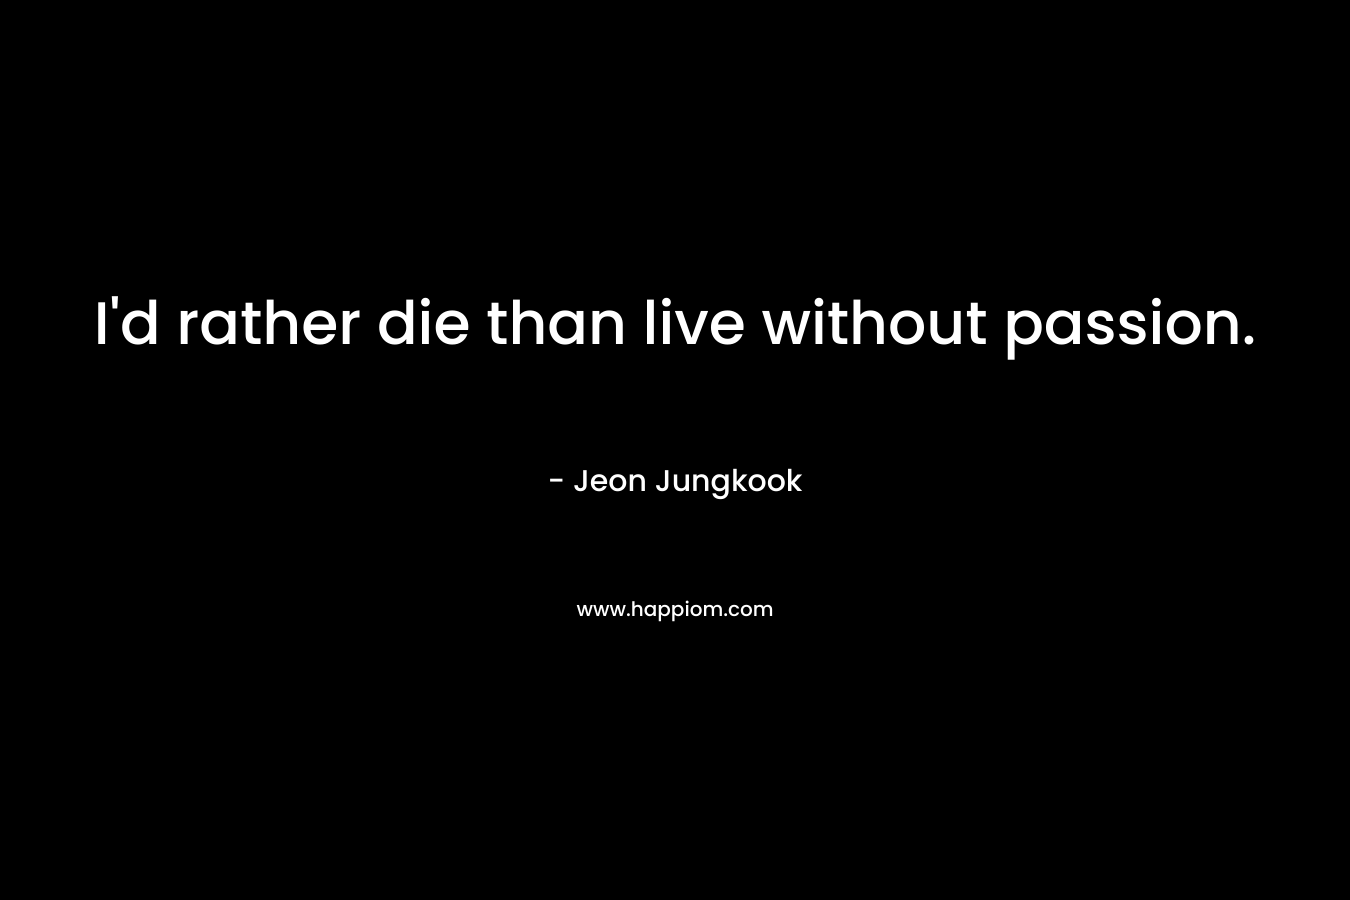 I'd rather die than live without passion.